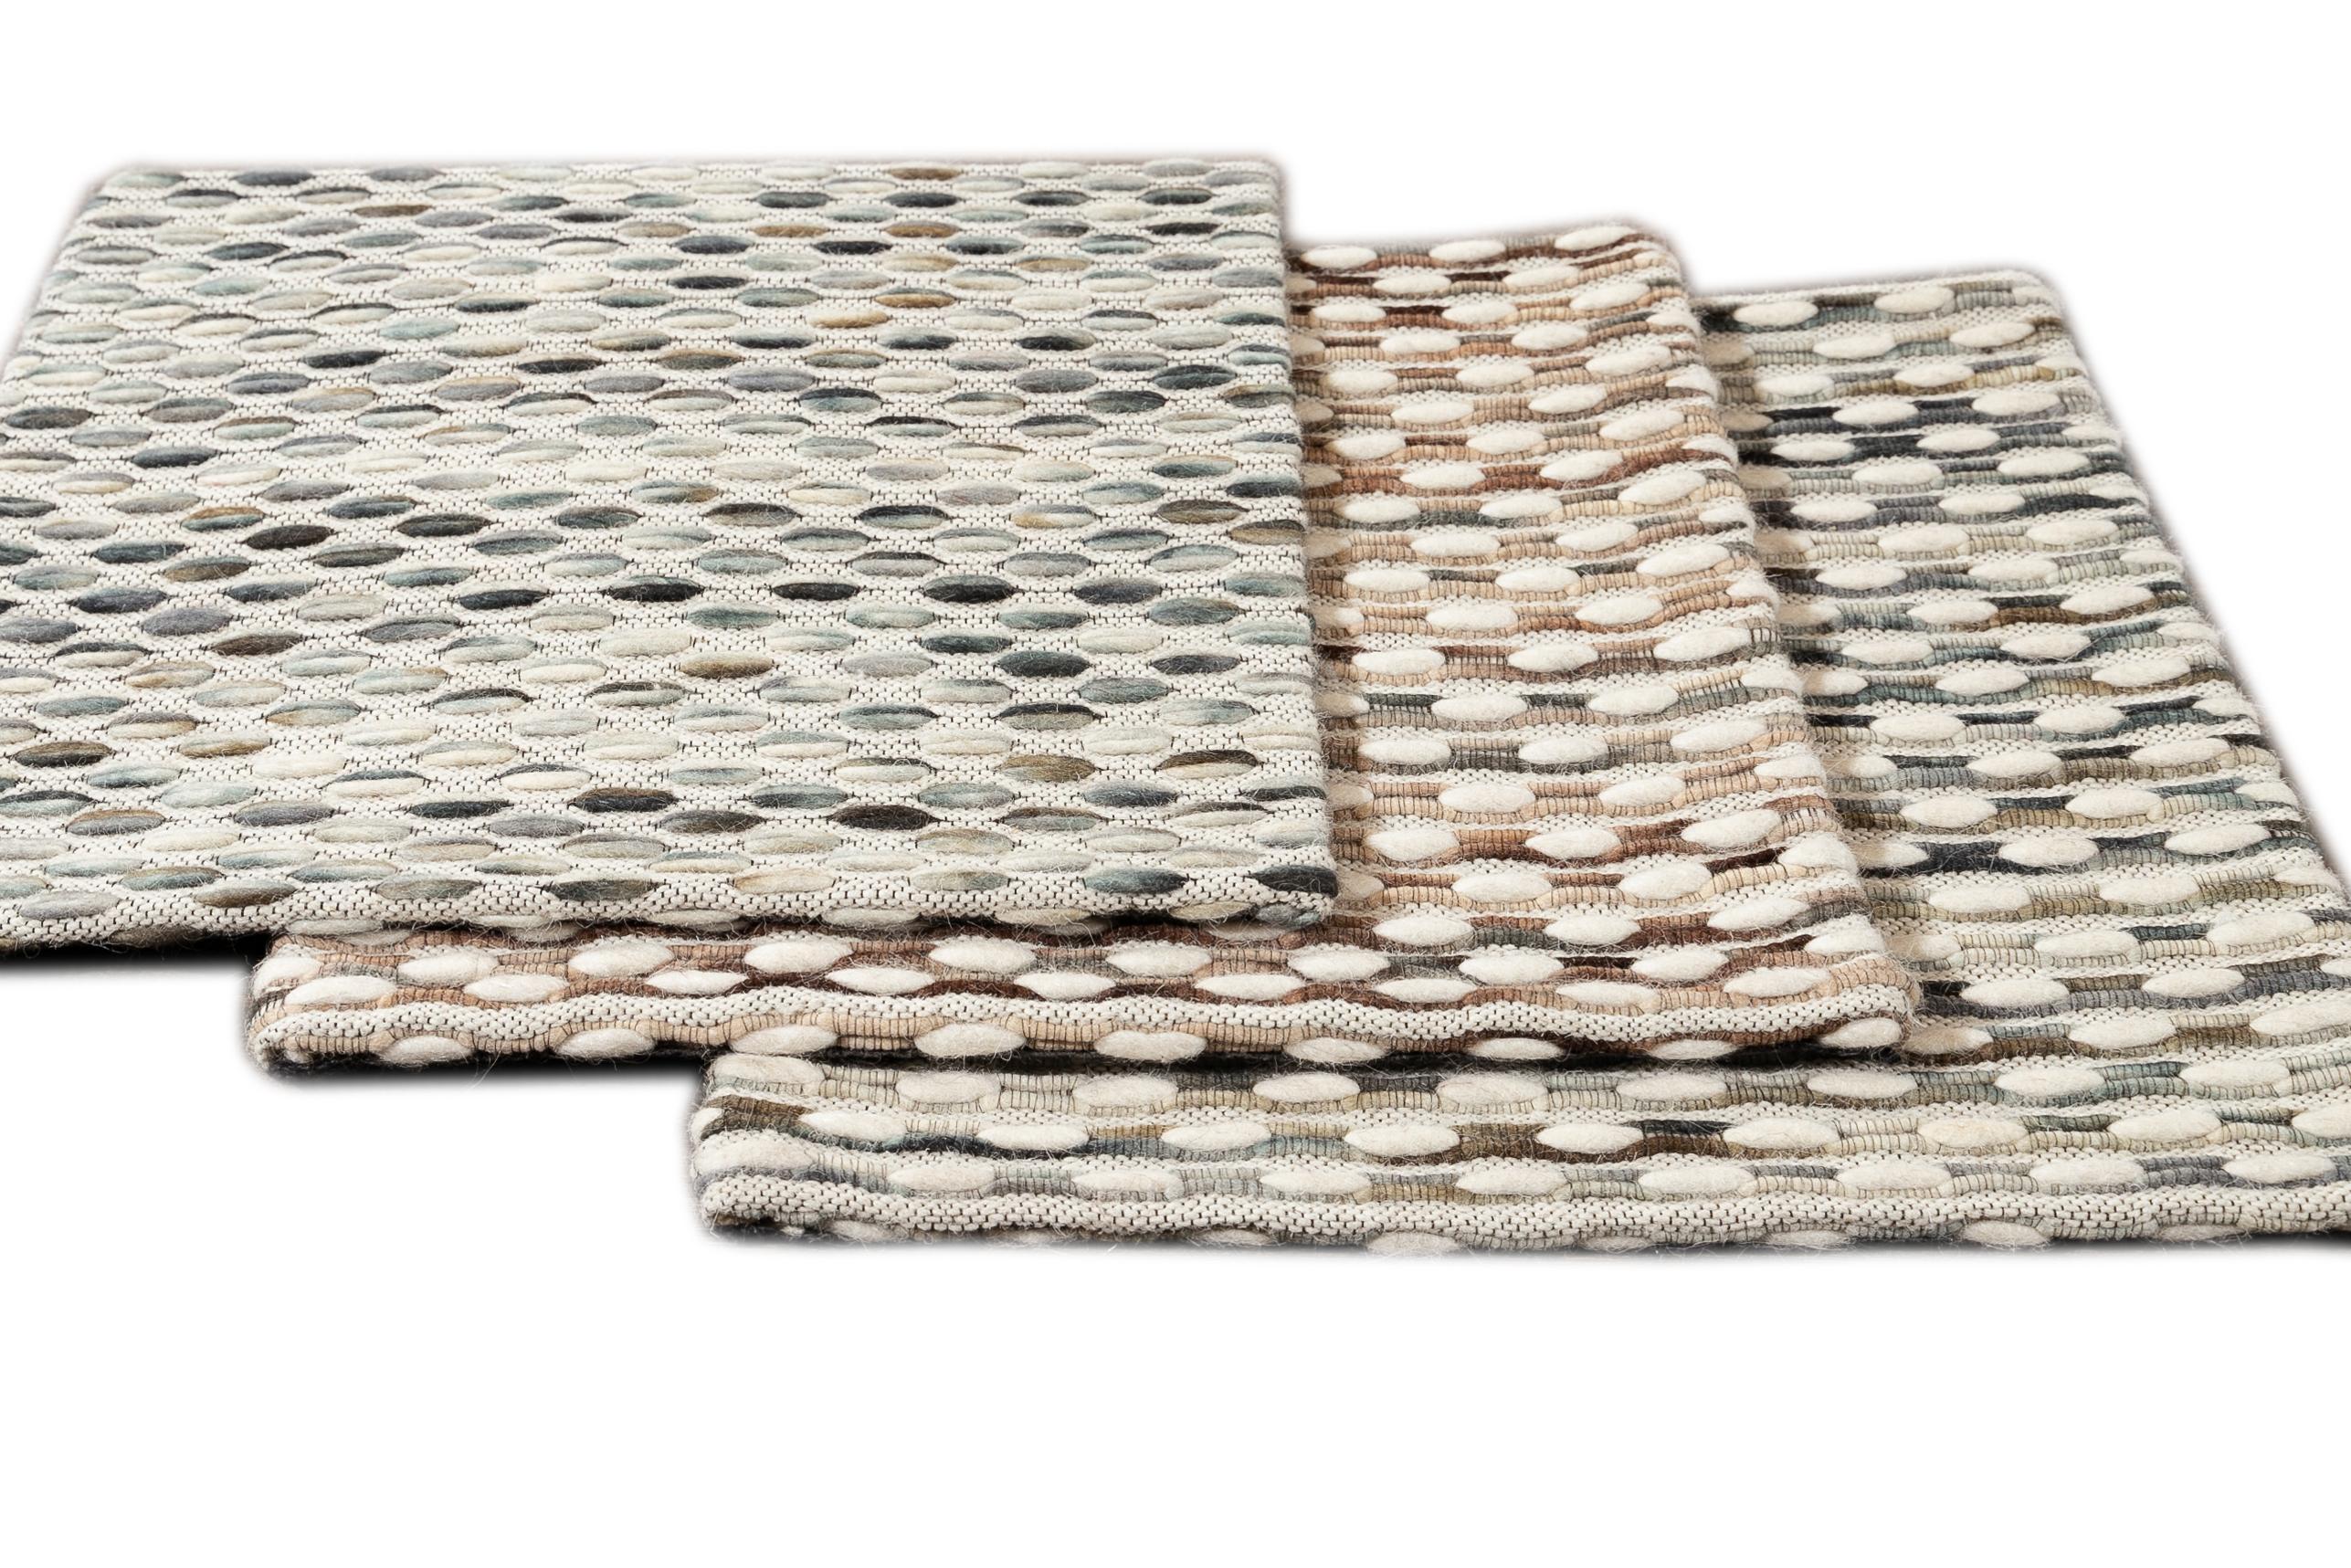 Wool textured custom rug. Custom sizes and colors made-to-order.

Material: 100% wool
Lead time: Approx. 12 wks
Available colors: Nine color combinations.